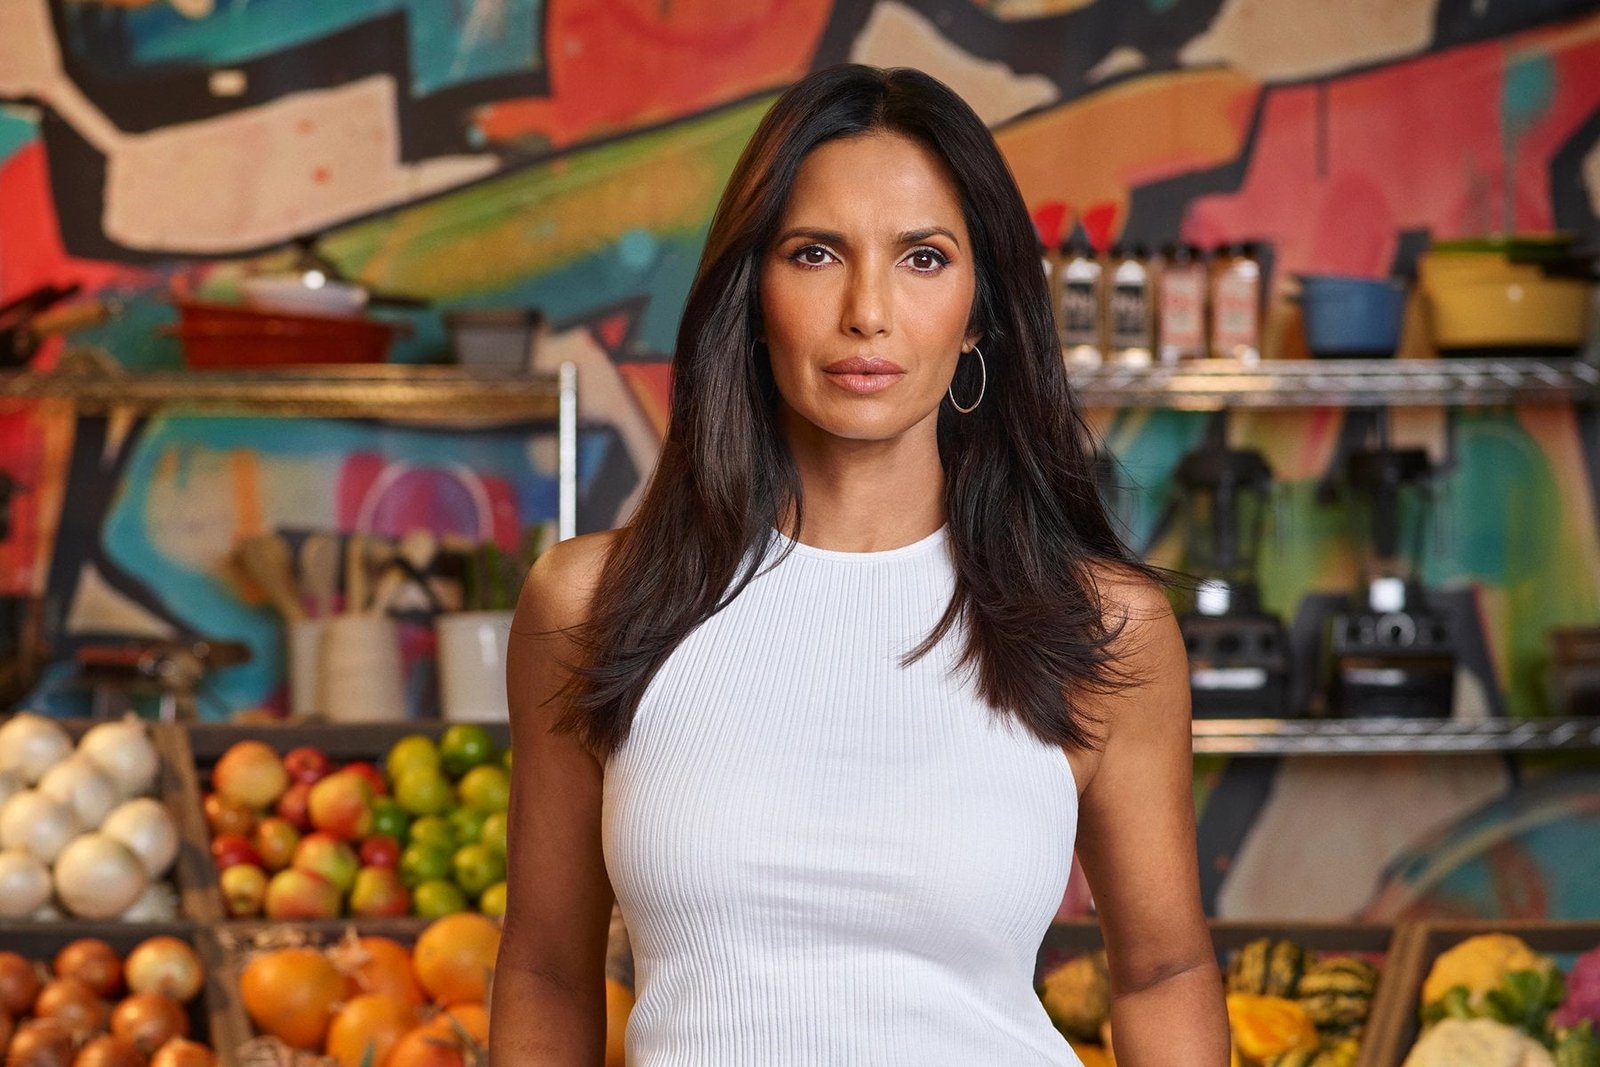 “It’s Time To Move On”: Padma Lakshmi Quits Top Chef